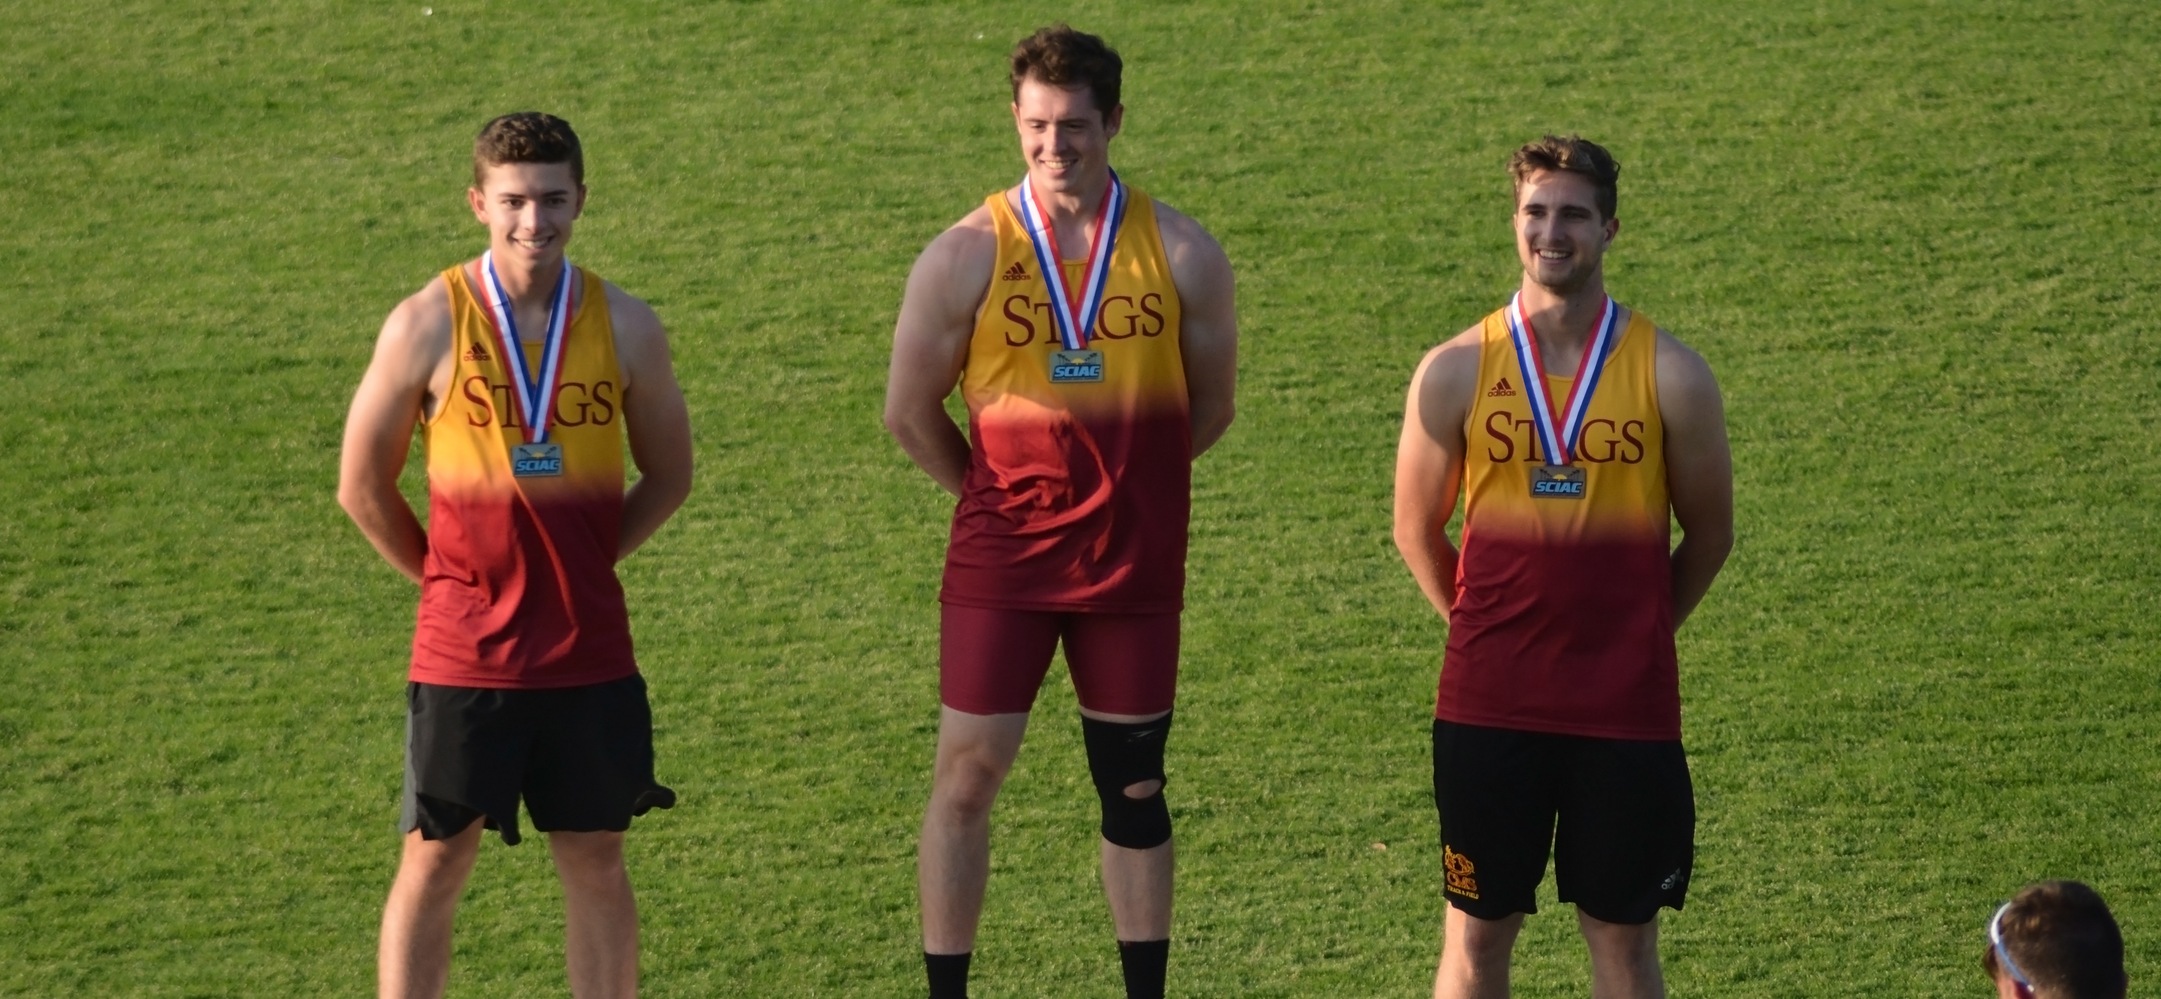 It was all Stags on the podium after the javelin, as Maxwell Knowles (center) finished first, Jordan Venglass was second, and Connor Schulz was third